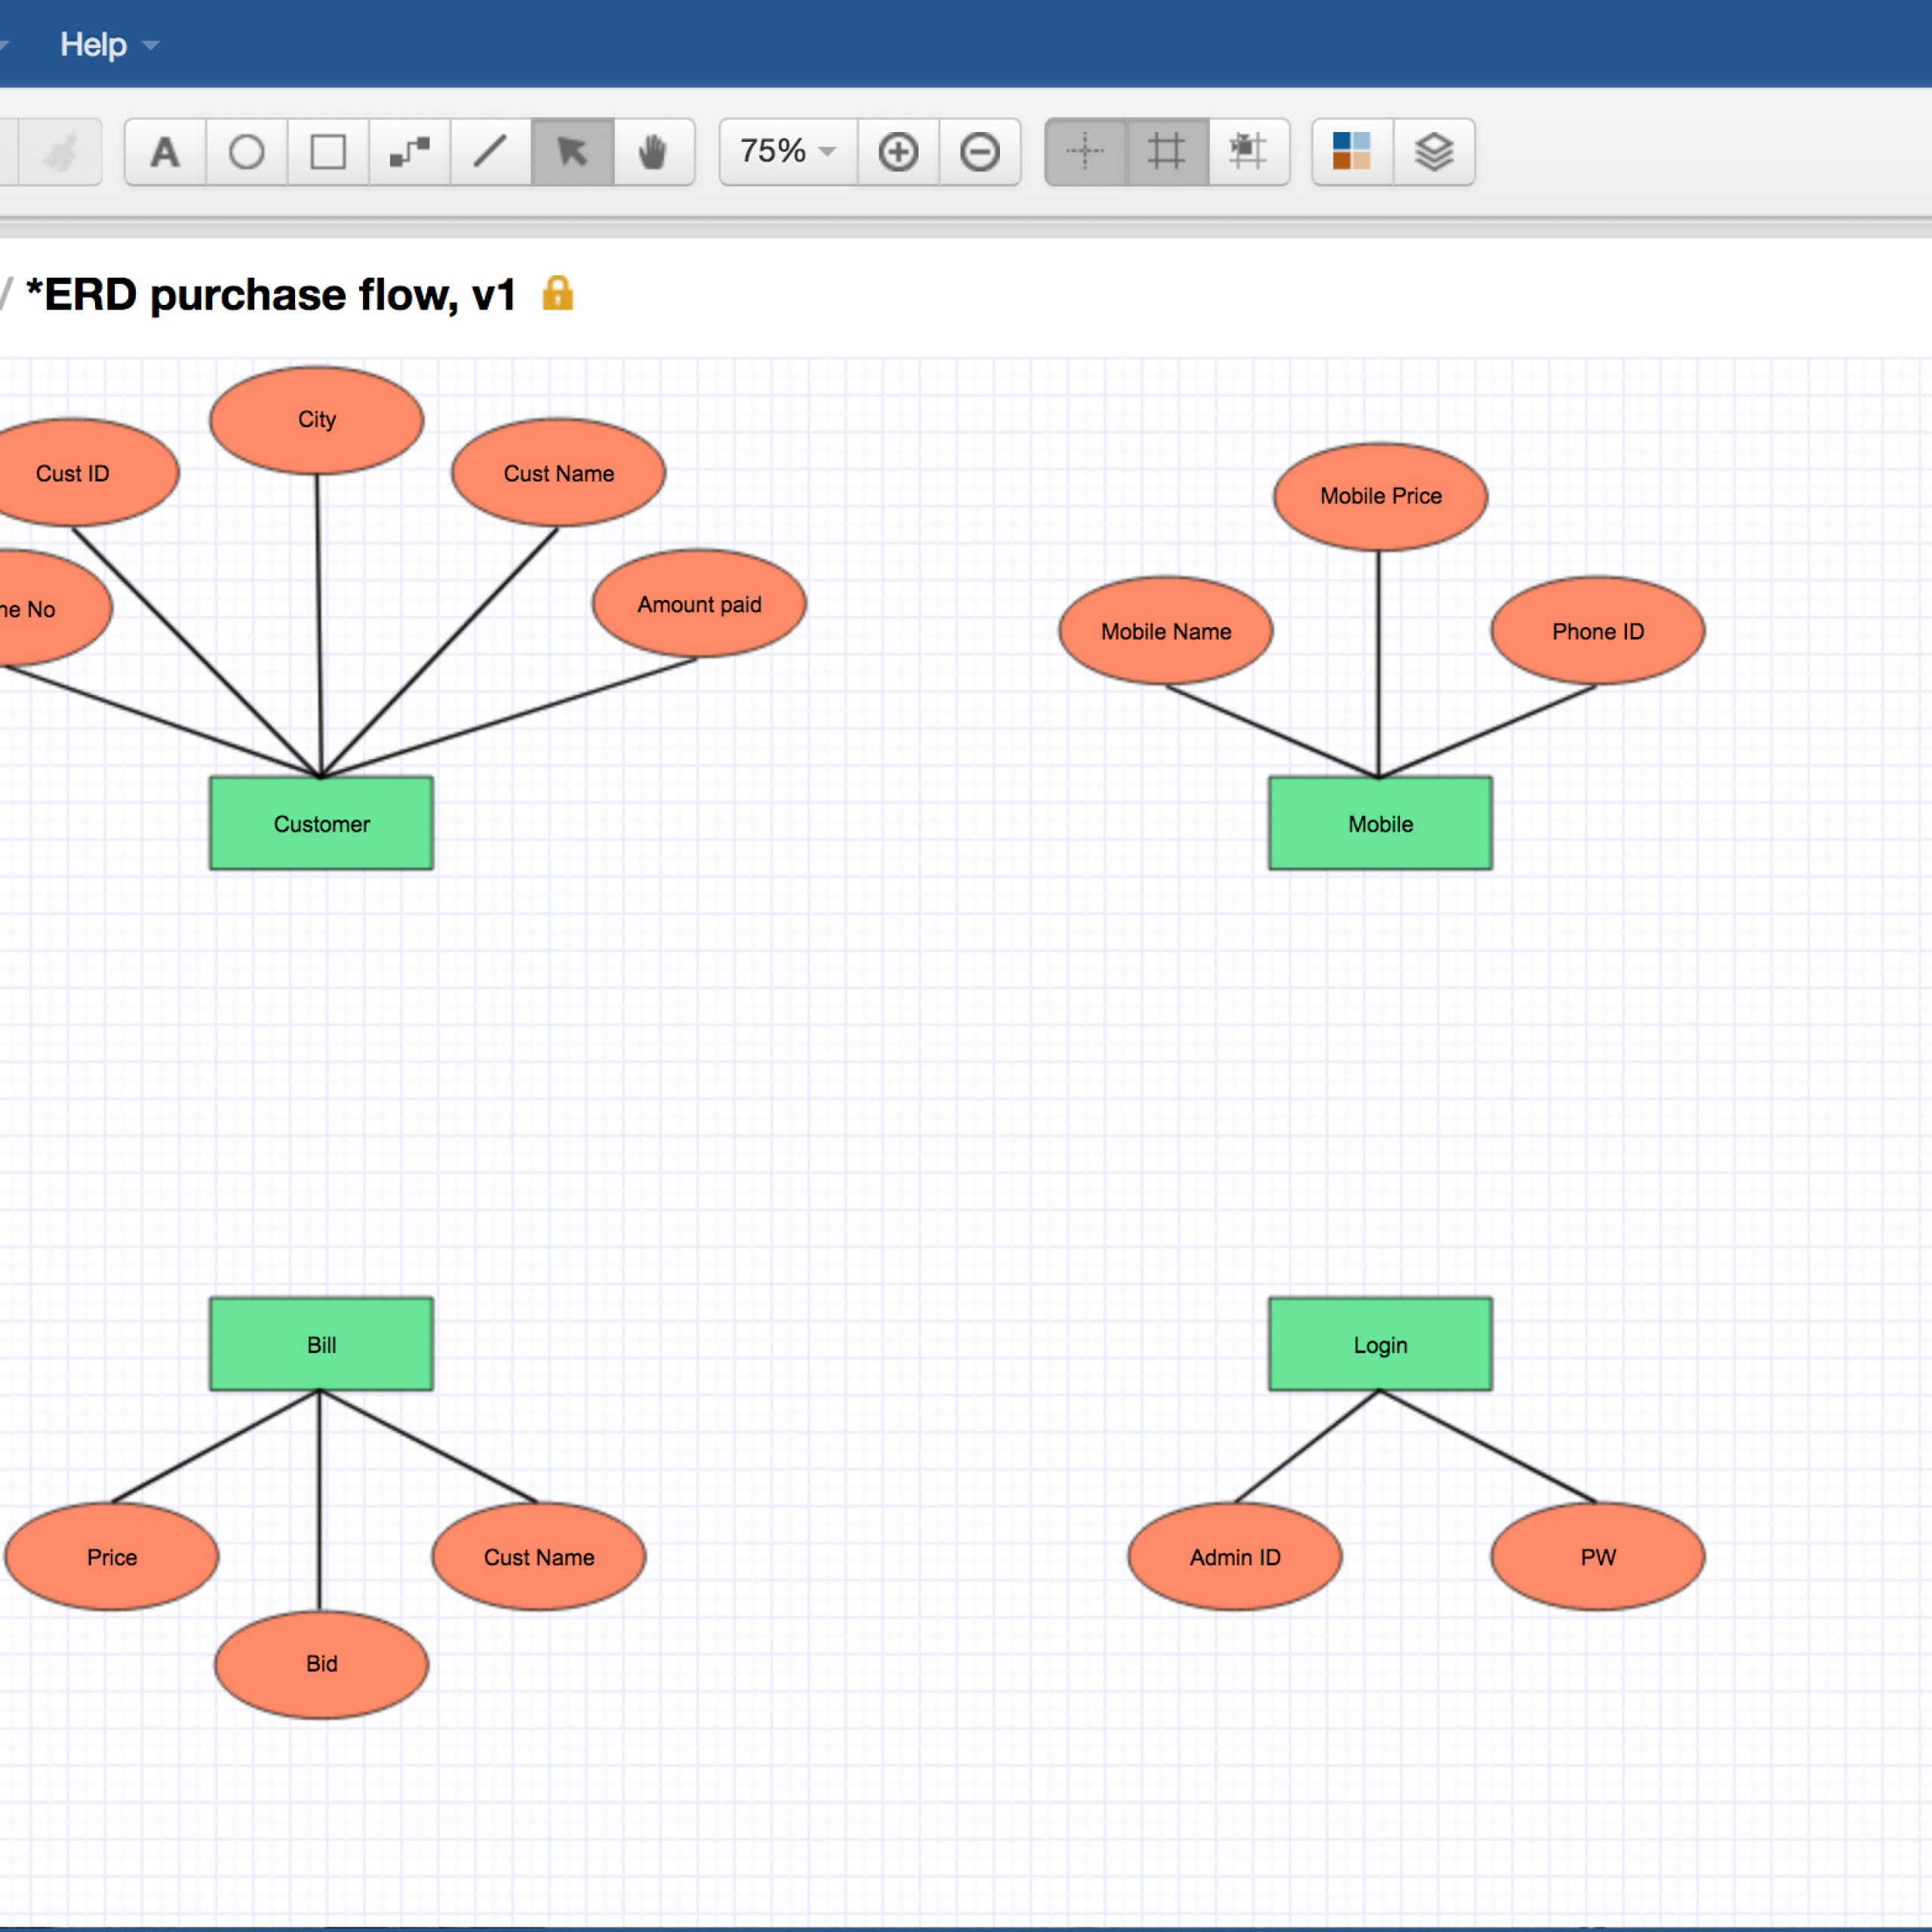 How To Draw An Entity-Relationship Diagram with regard to Er Diagram Word